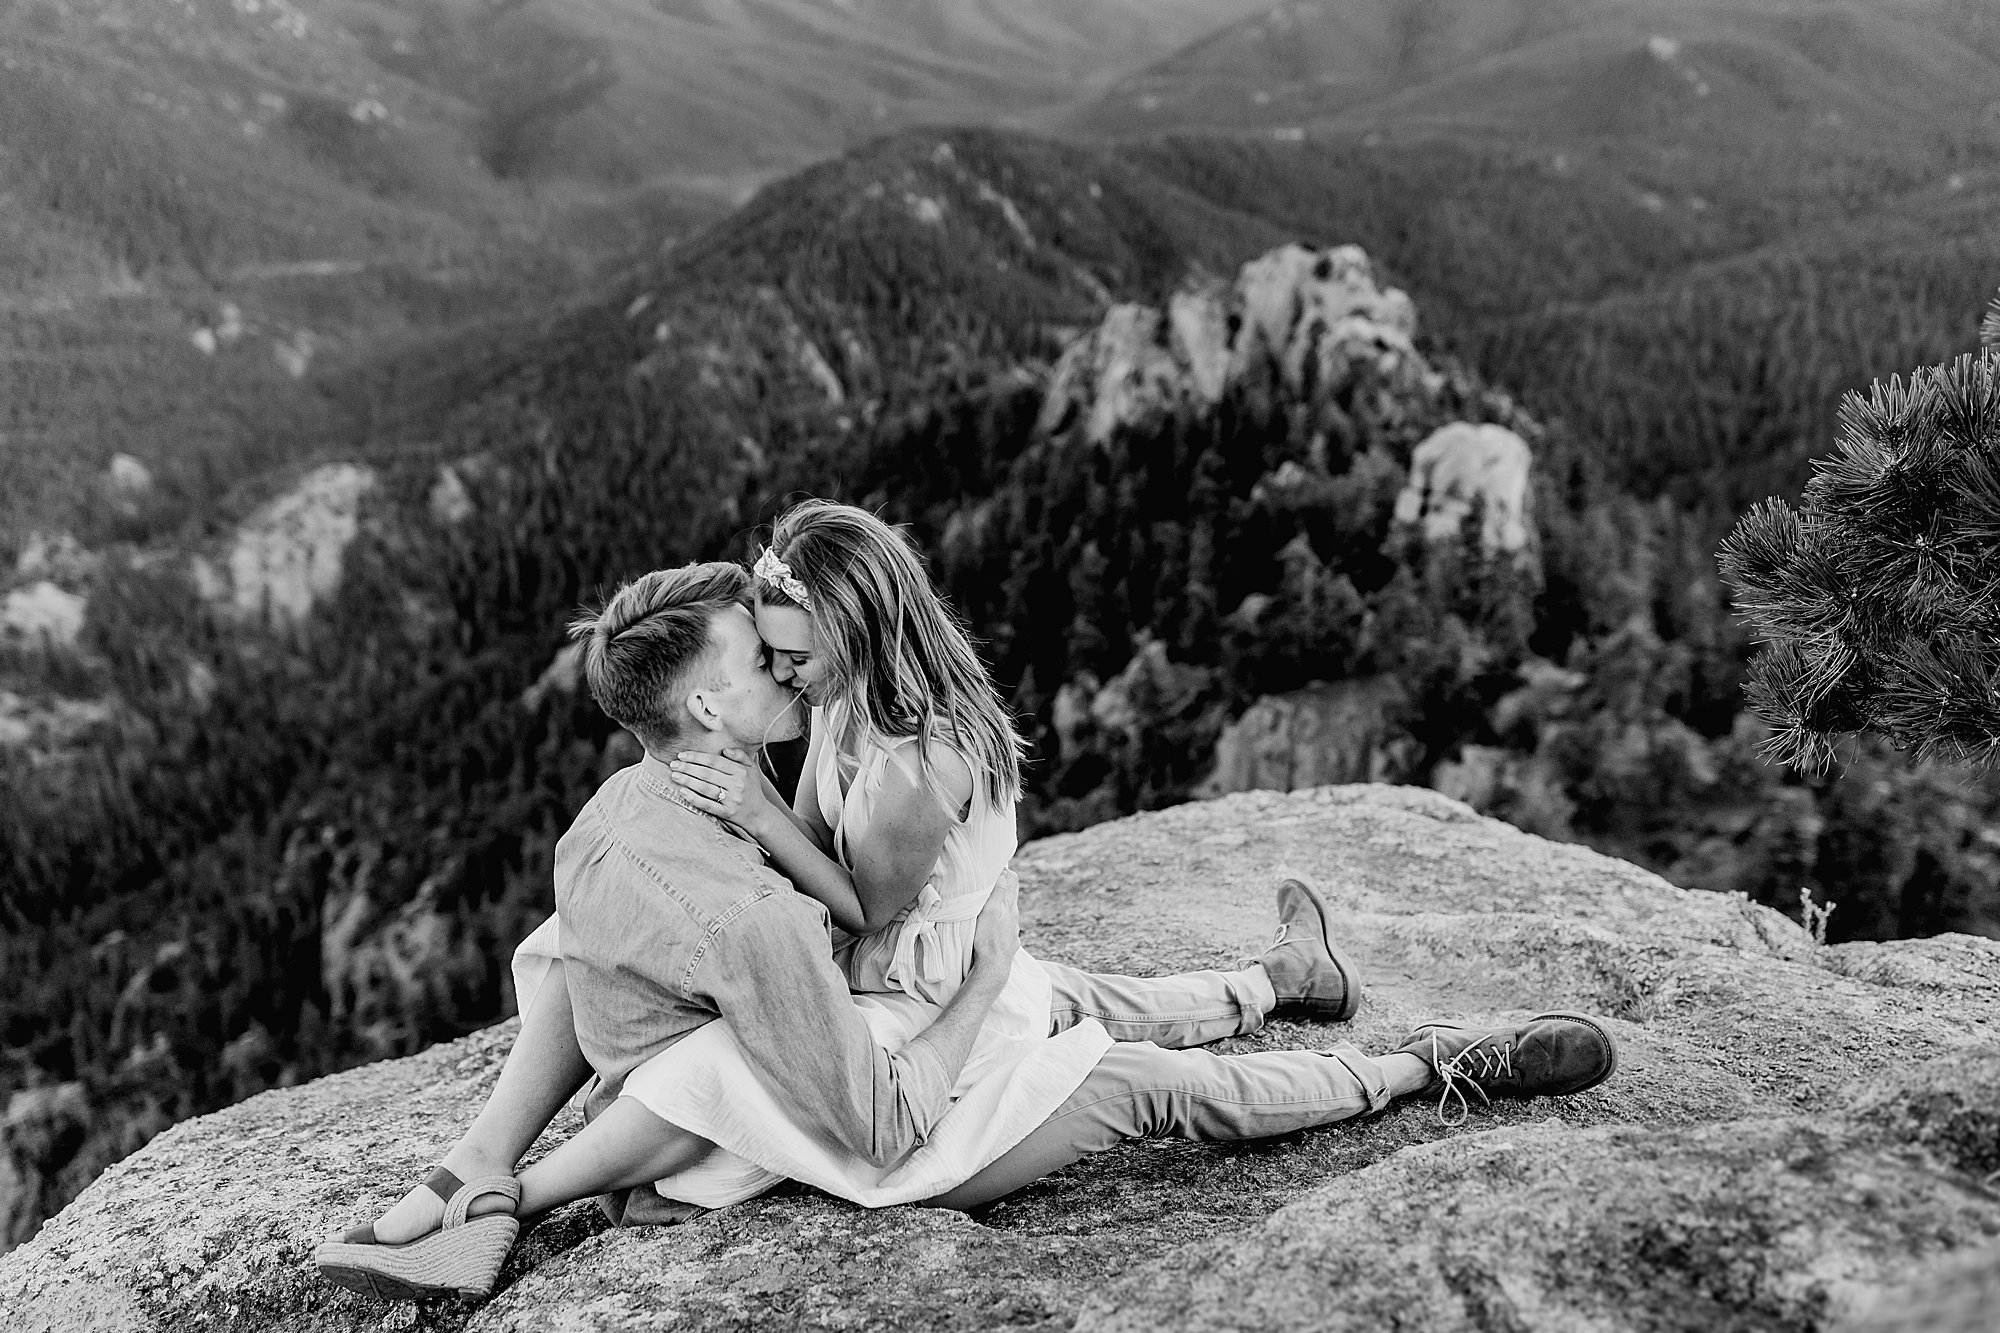 colorado couple cuddles up together with gorgeous mountain scenery